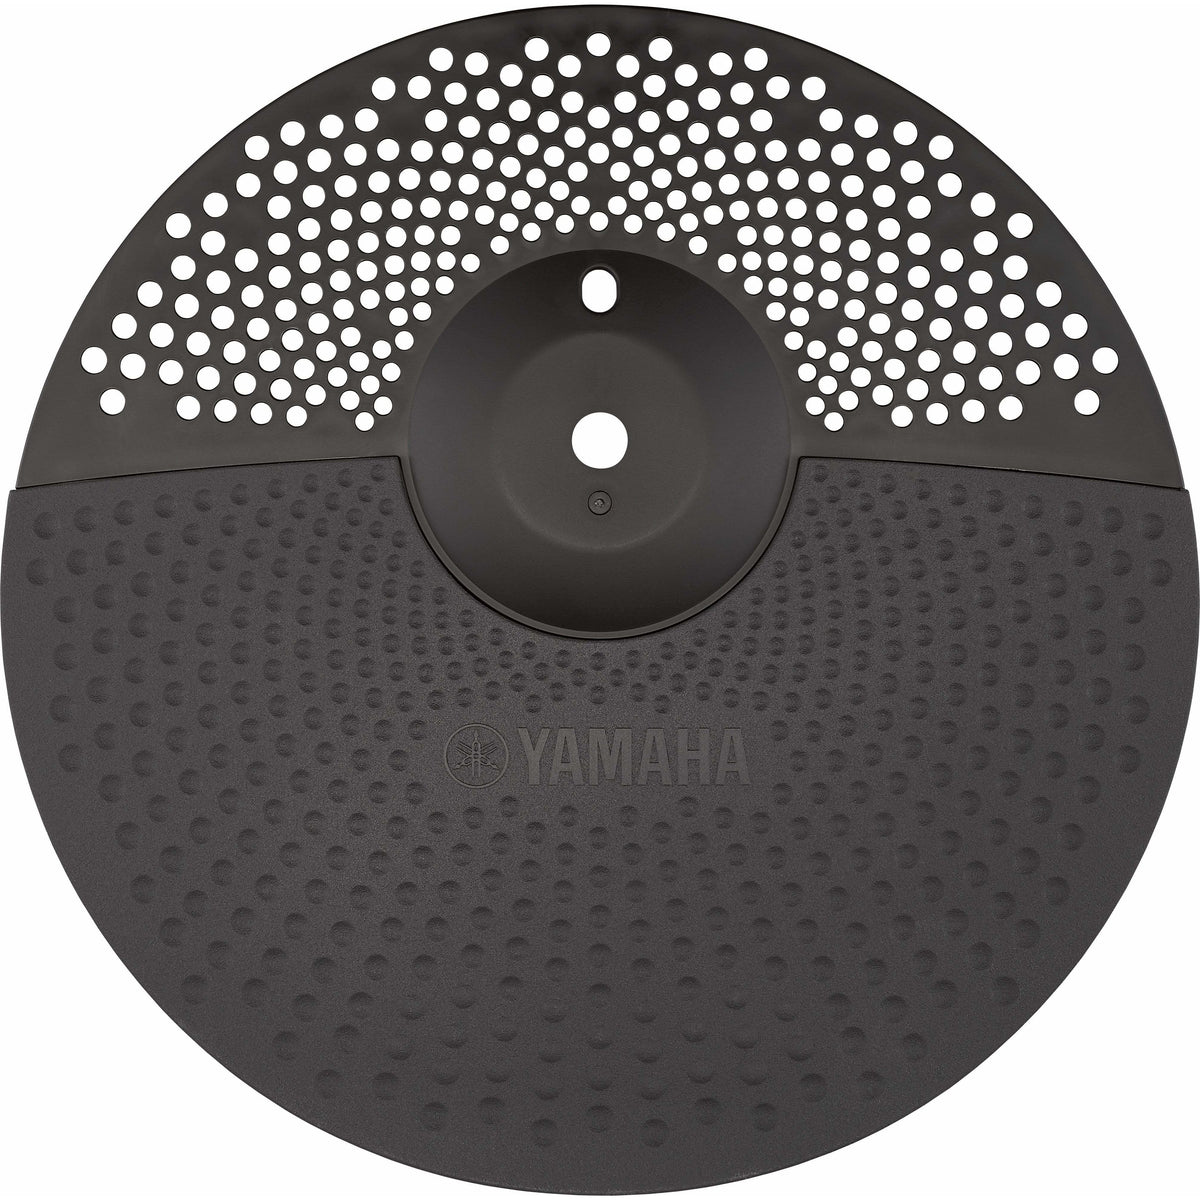 Yamaha Percussion Yamaha PCY95AT Cymbal Pad 10 Inch with Attachment - Byron Music